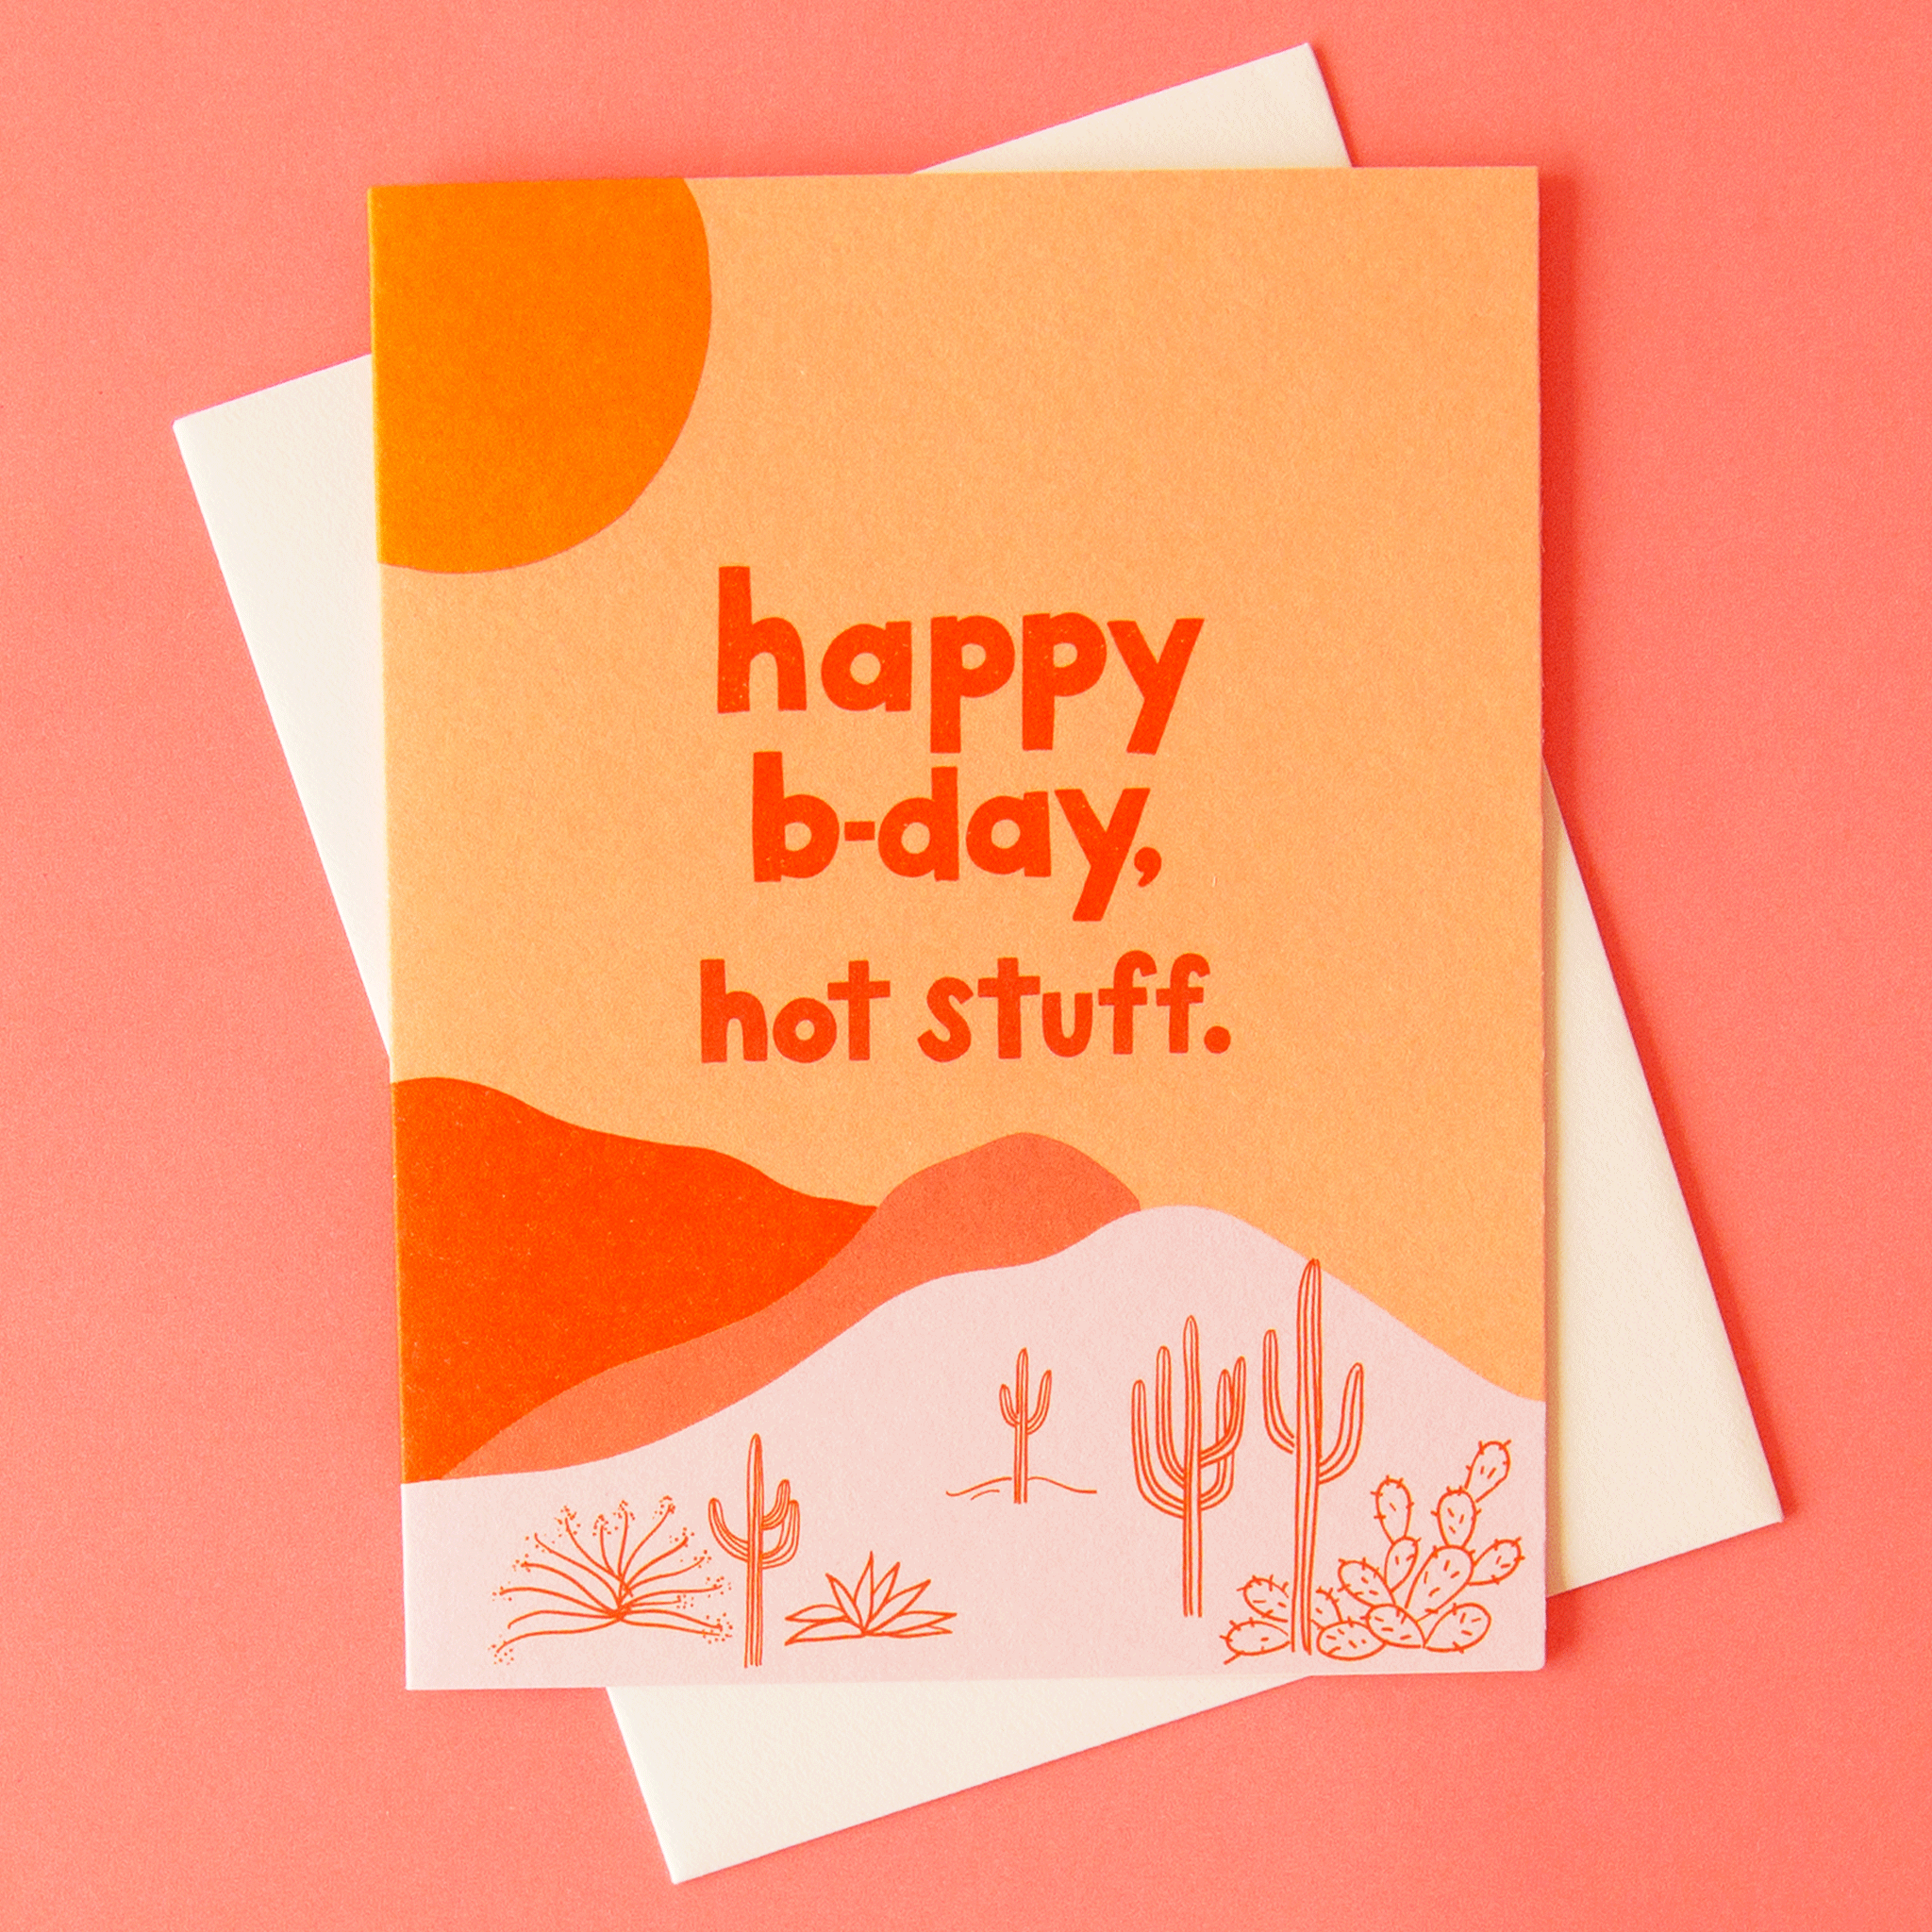 A salmon pink greeting card with a desert scape graphic featuring cactus and aloe illustrations along with a red and pink mountain range and a mustard yellow sun in the top left corner. The text on the front reads, &quot;happy b-day hot stuff.&quot; in red font.